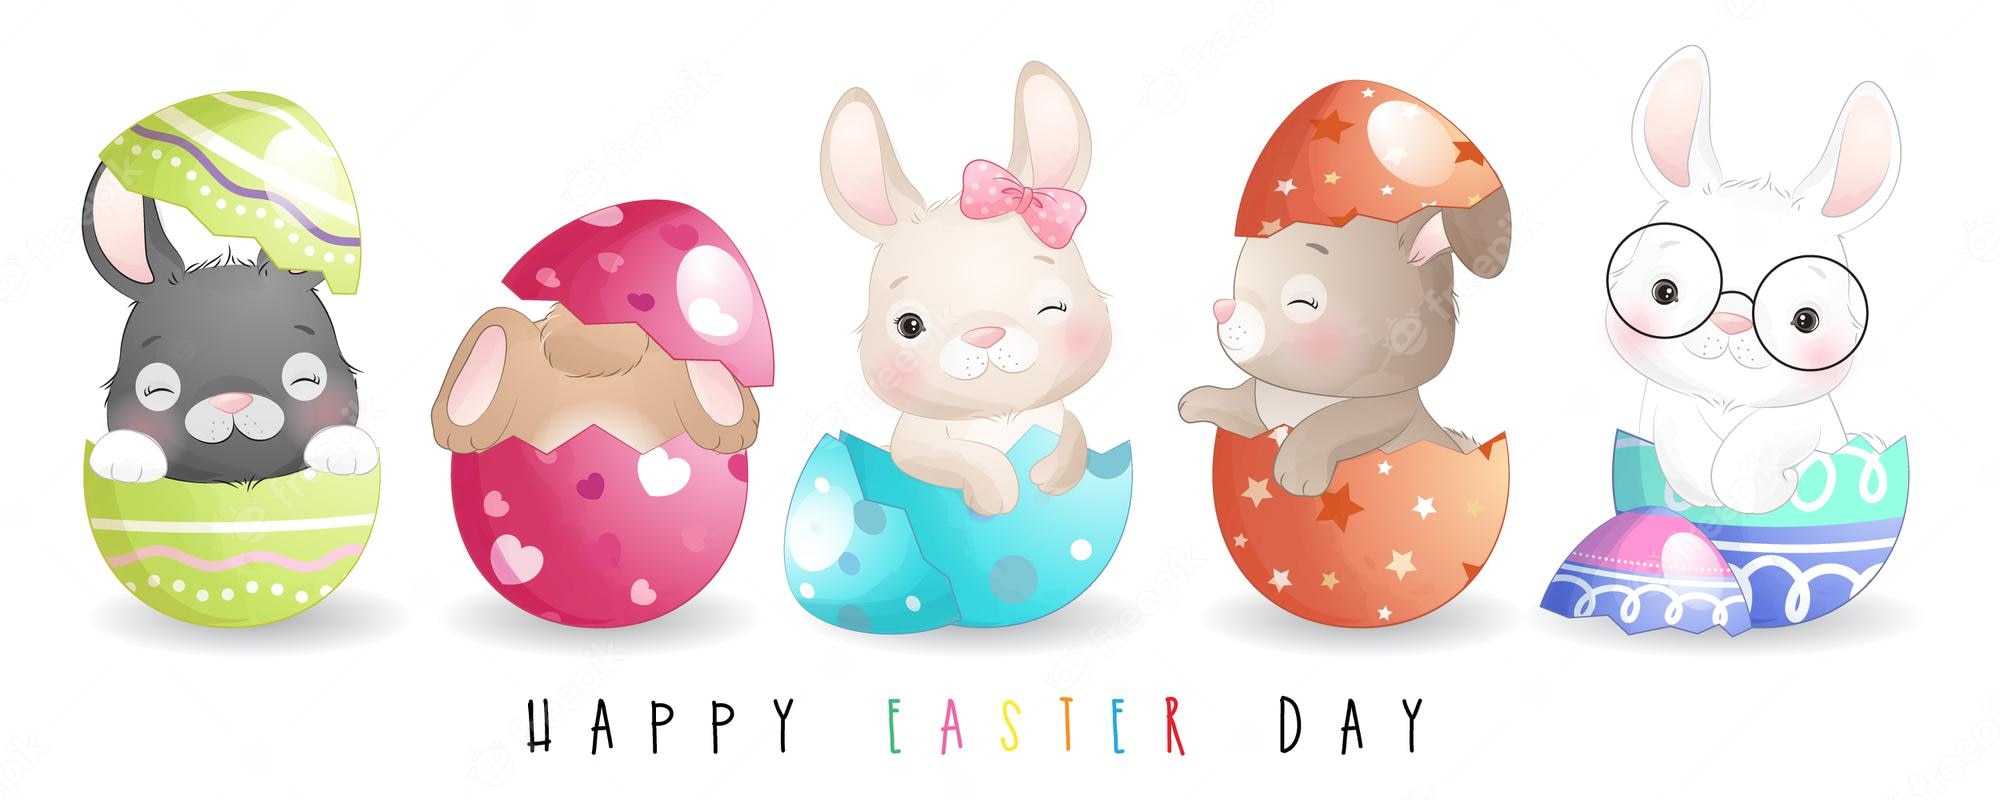 Premium Vector. Cute doodle bunny for happy easter day